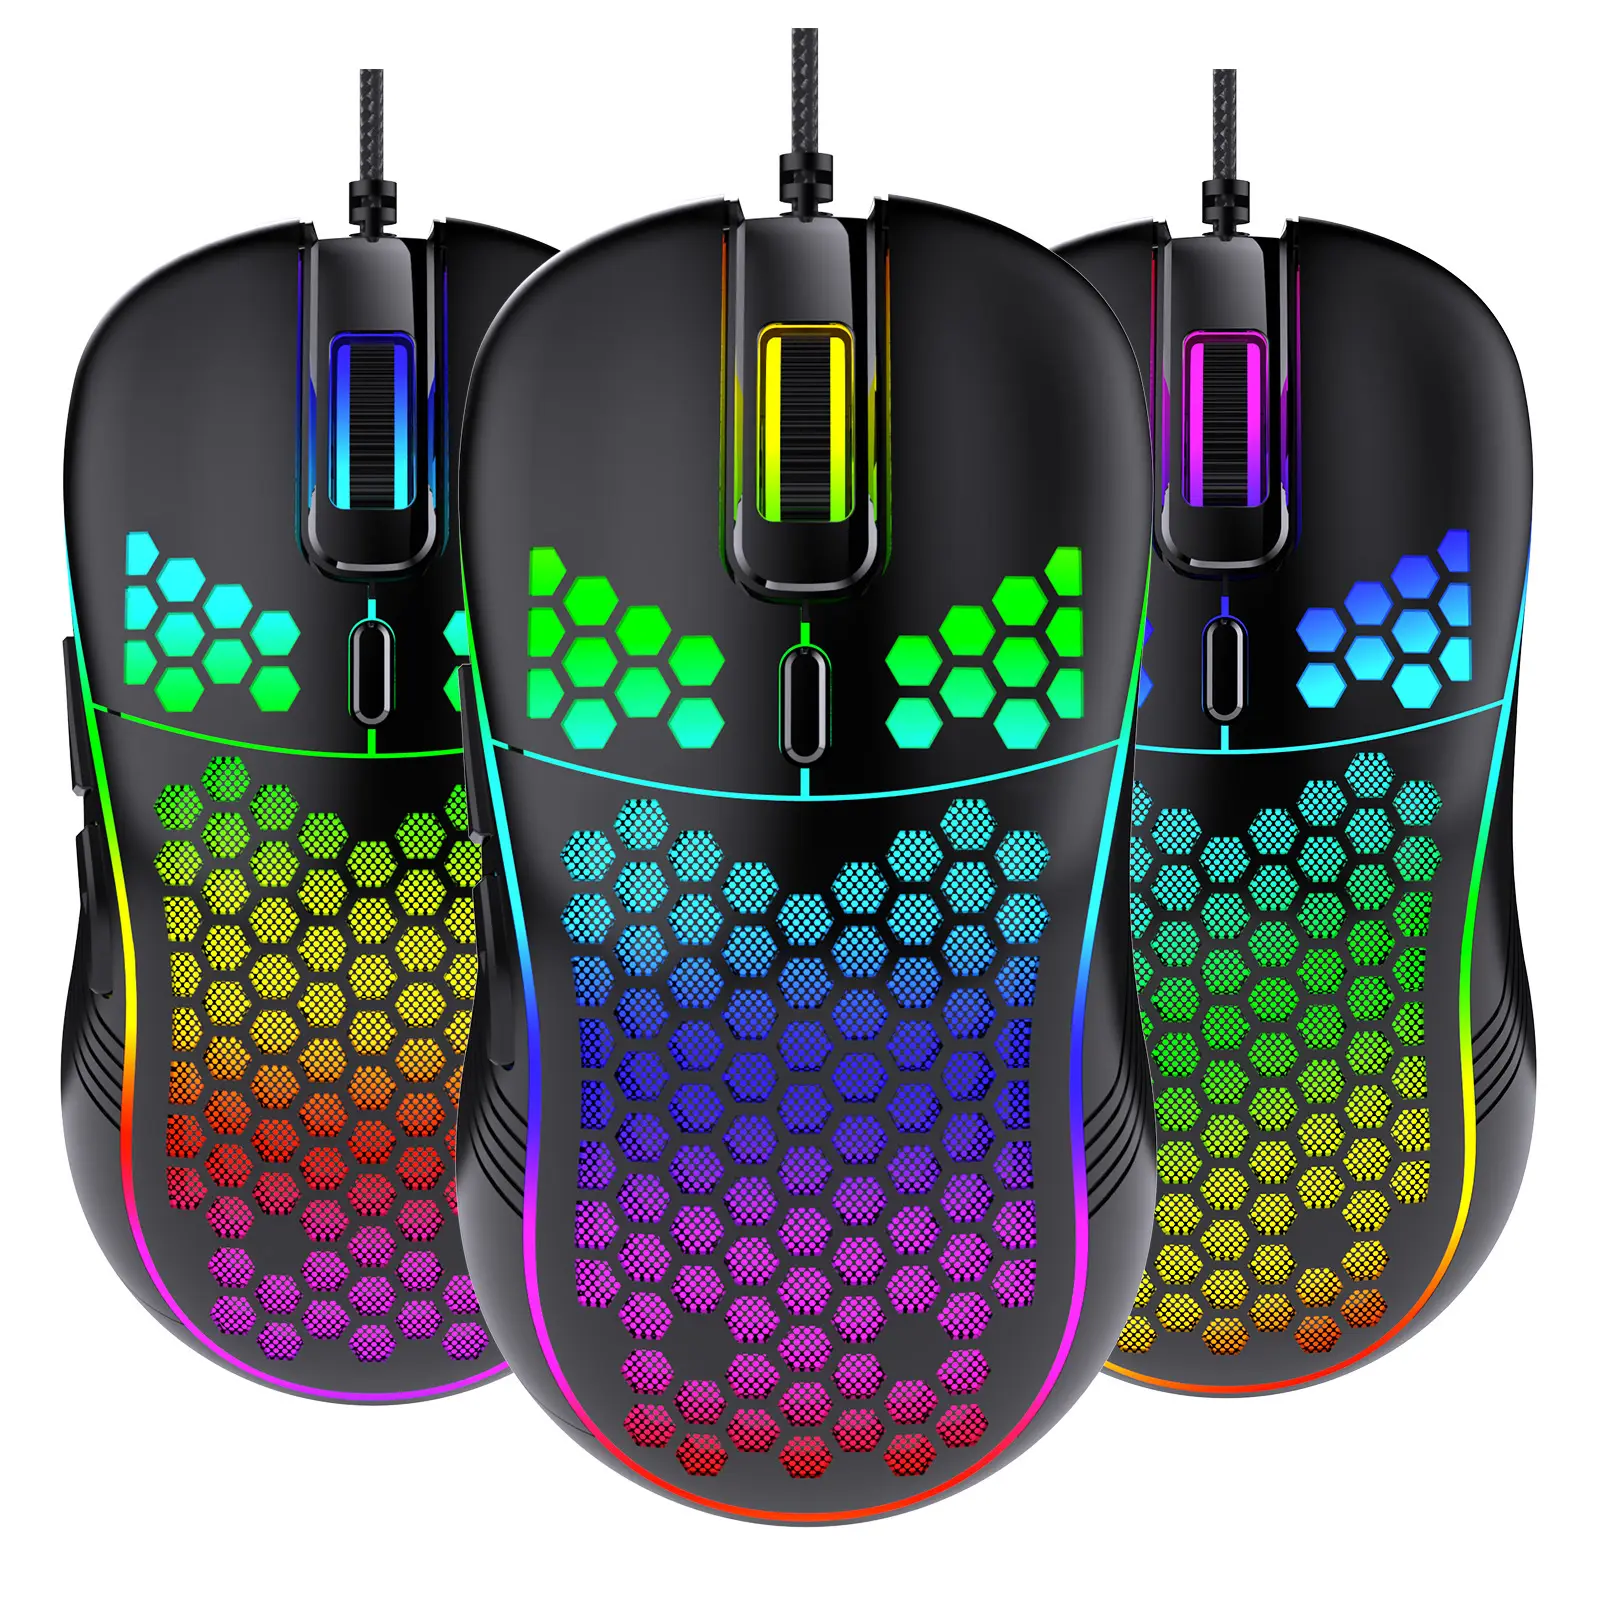 USB wired RGB Light Honeycomb Gaming Mouse Desktop PC Computers Notebook Laptop Mice Gamer Cute Programable mice